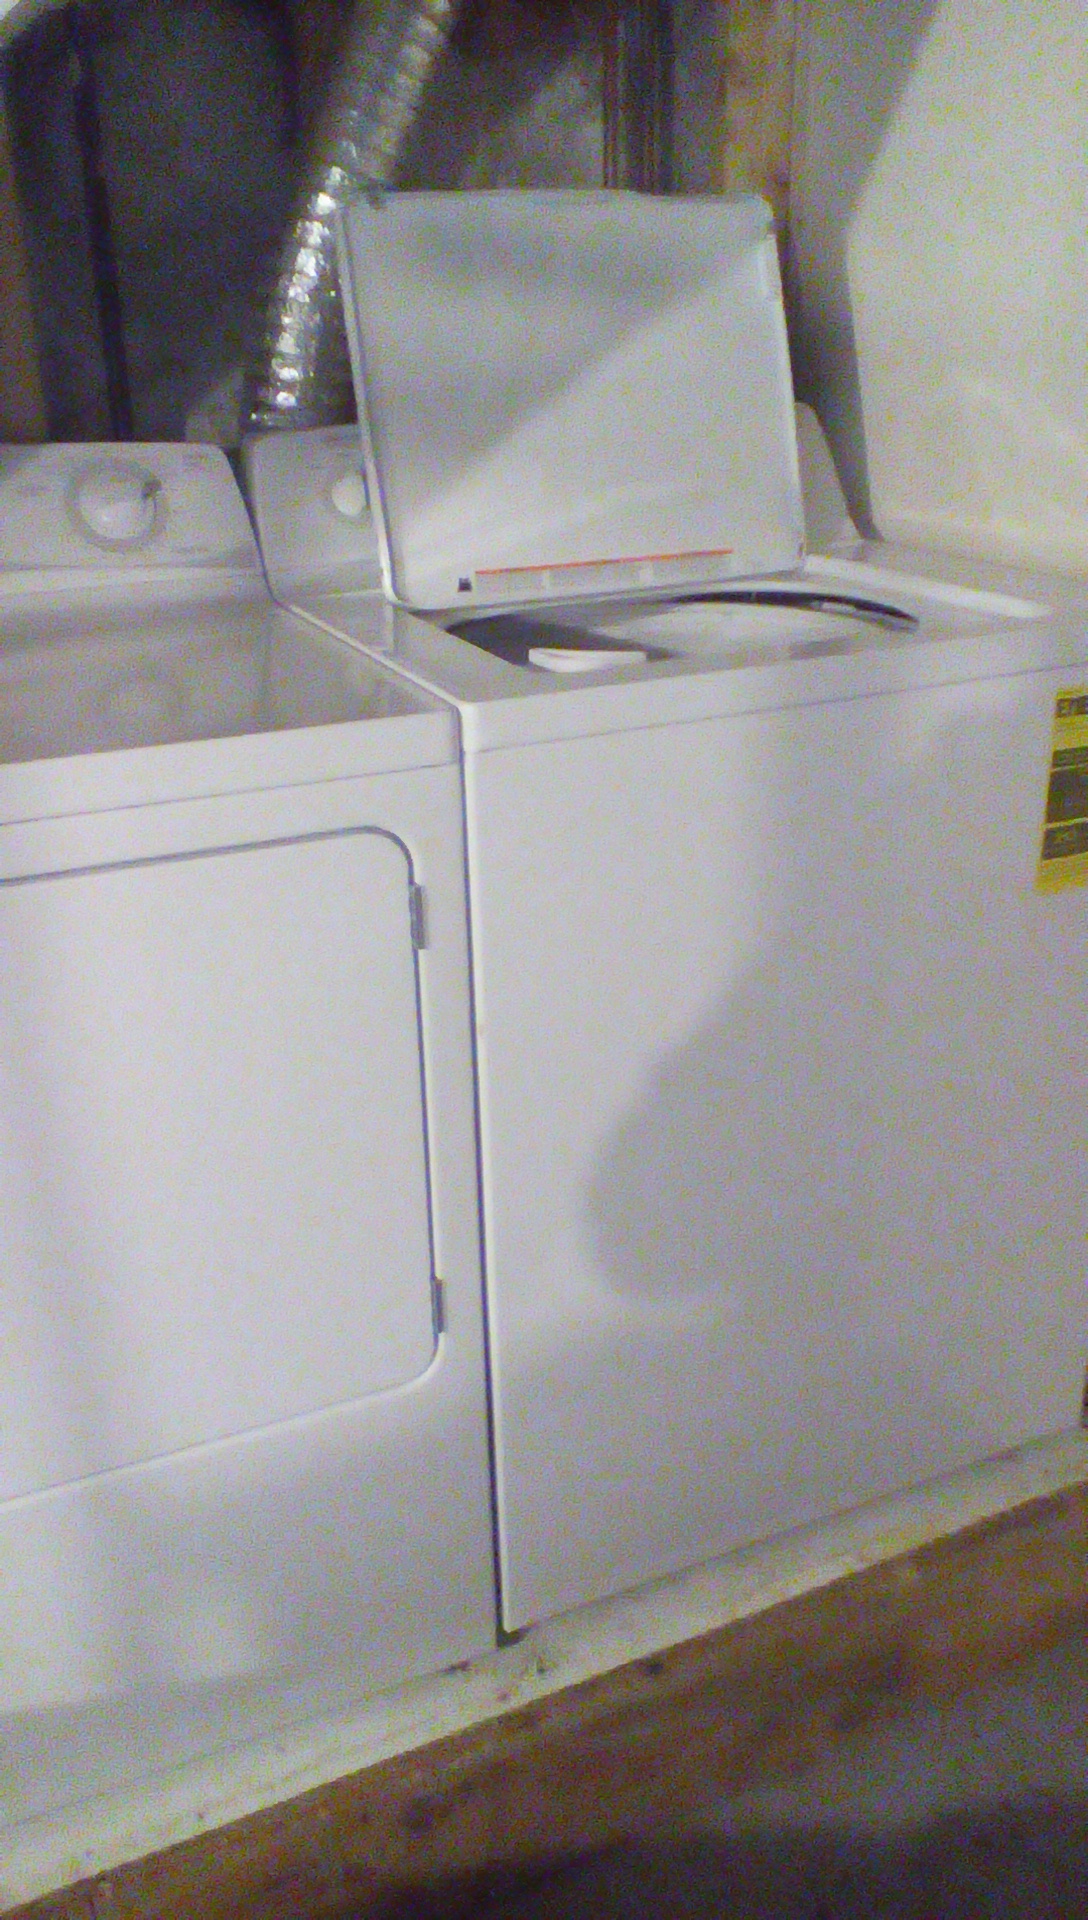 My new washer and dryer